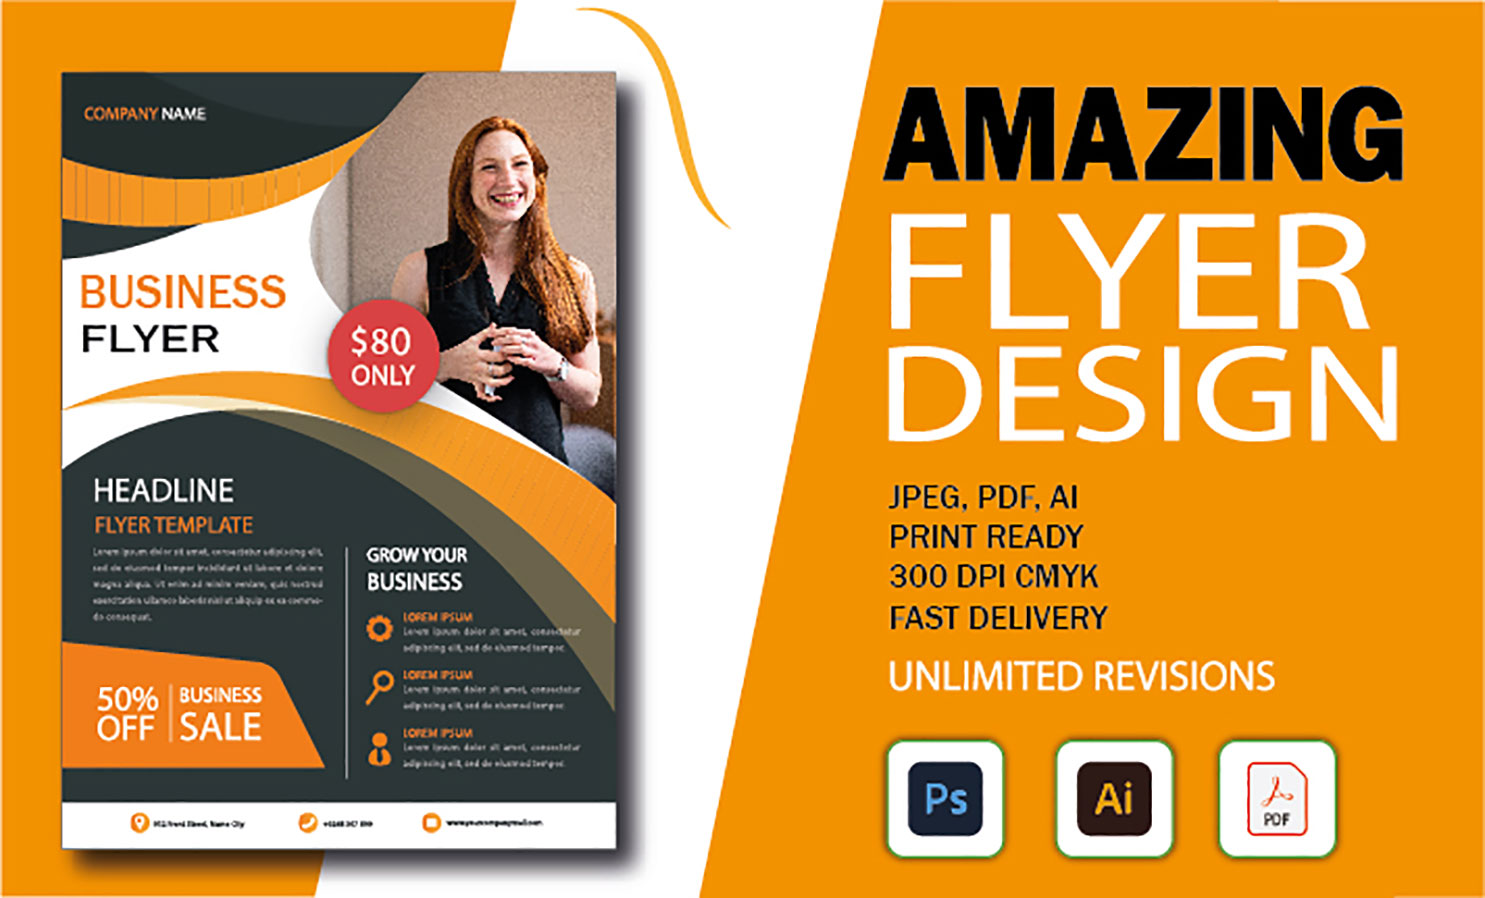 I will design amazing business flyer, brochure, or any graphic design